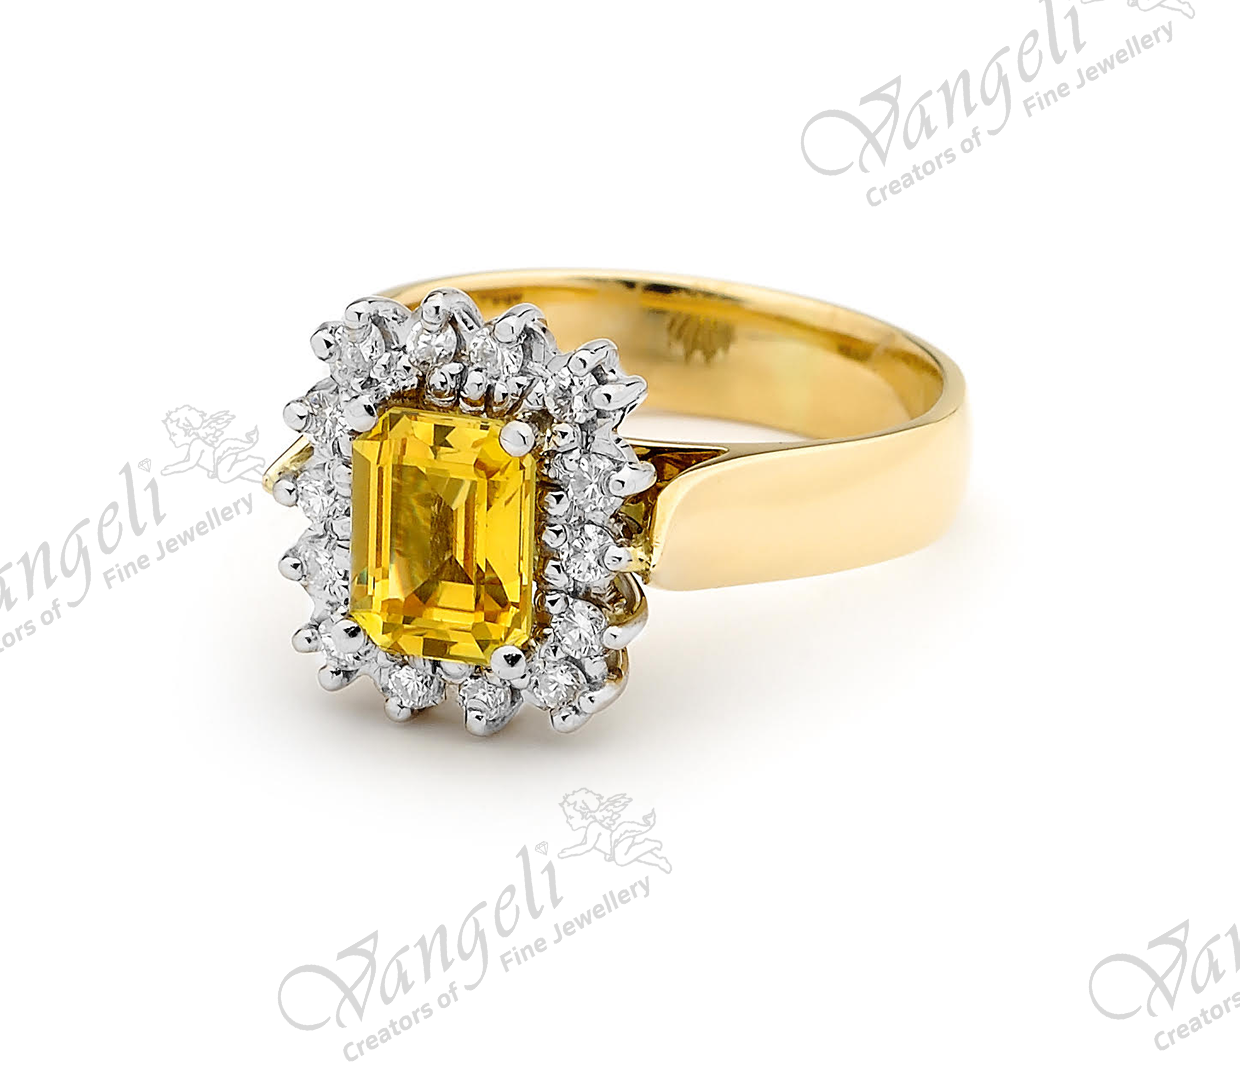 18ct white and yellow gold golden sapphire and diamond hand-made ring